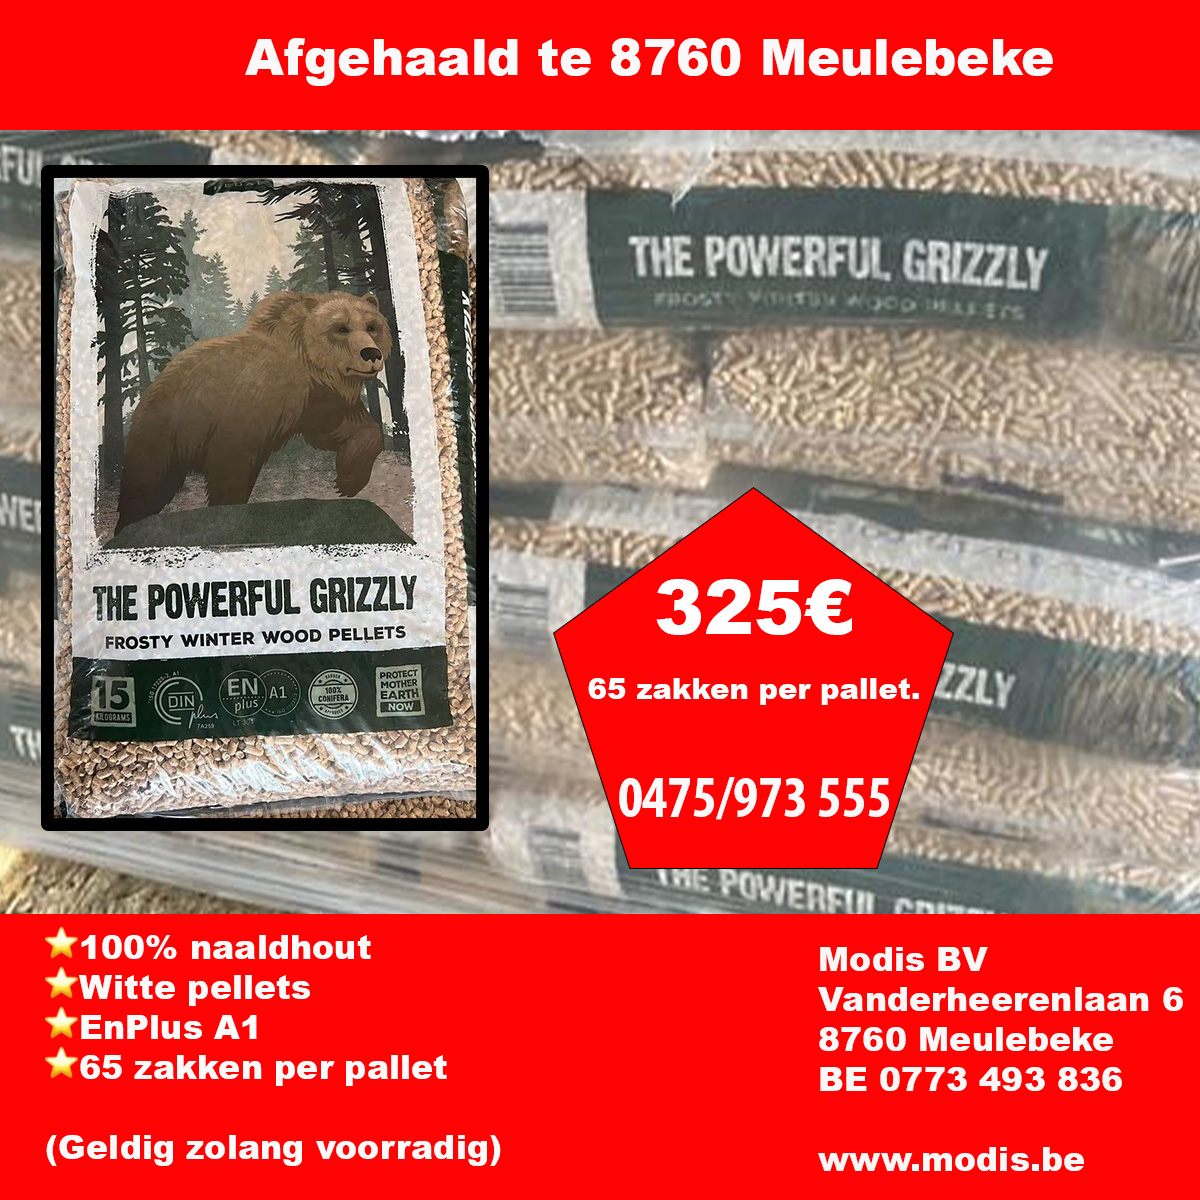 grizzly afgehaald